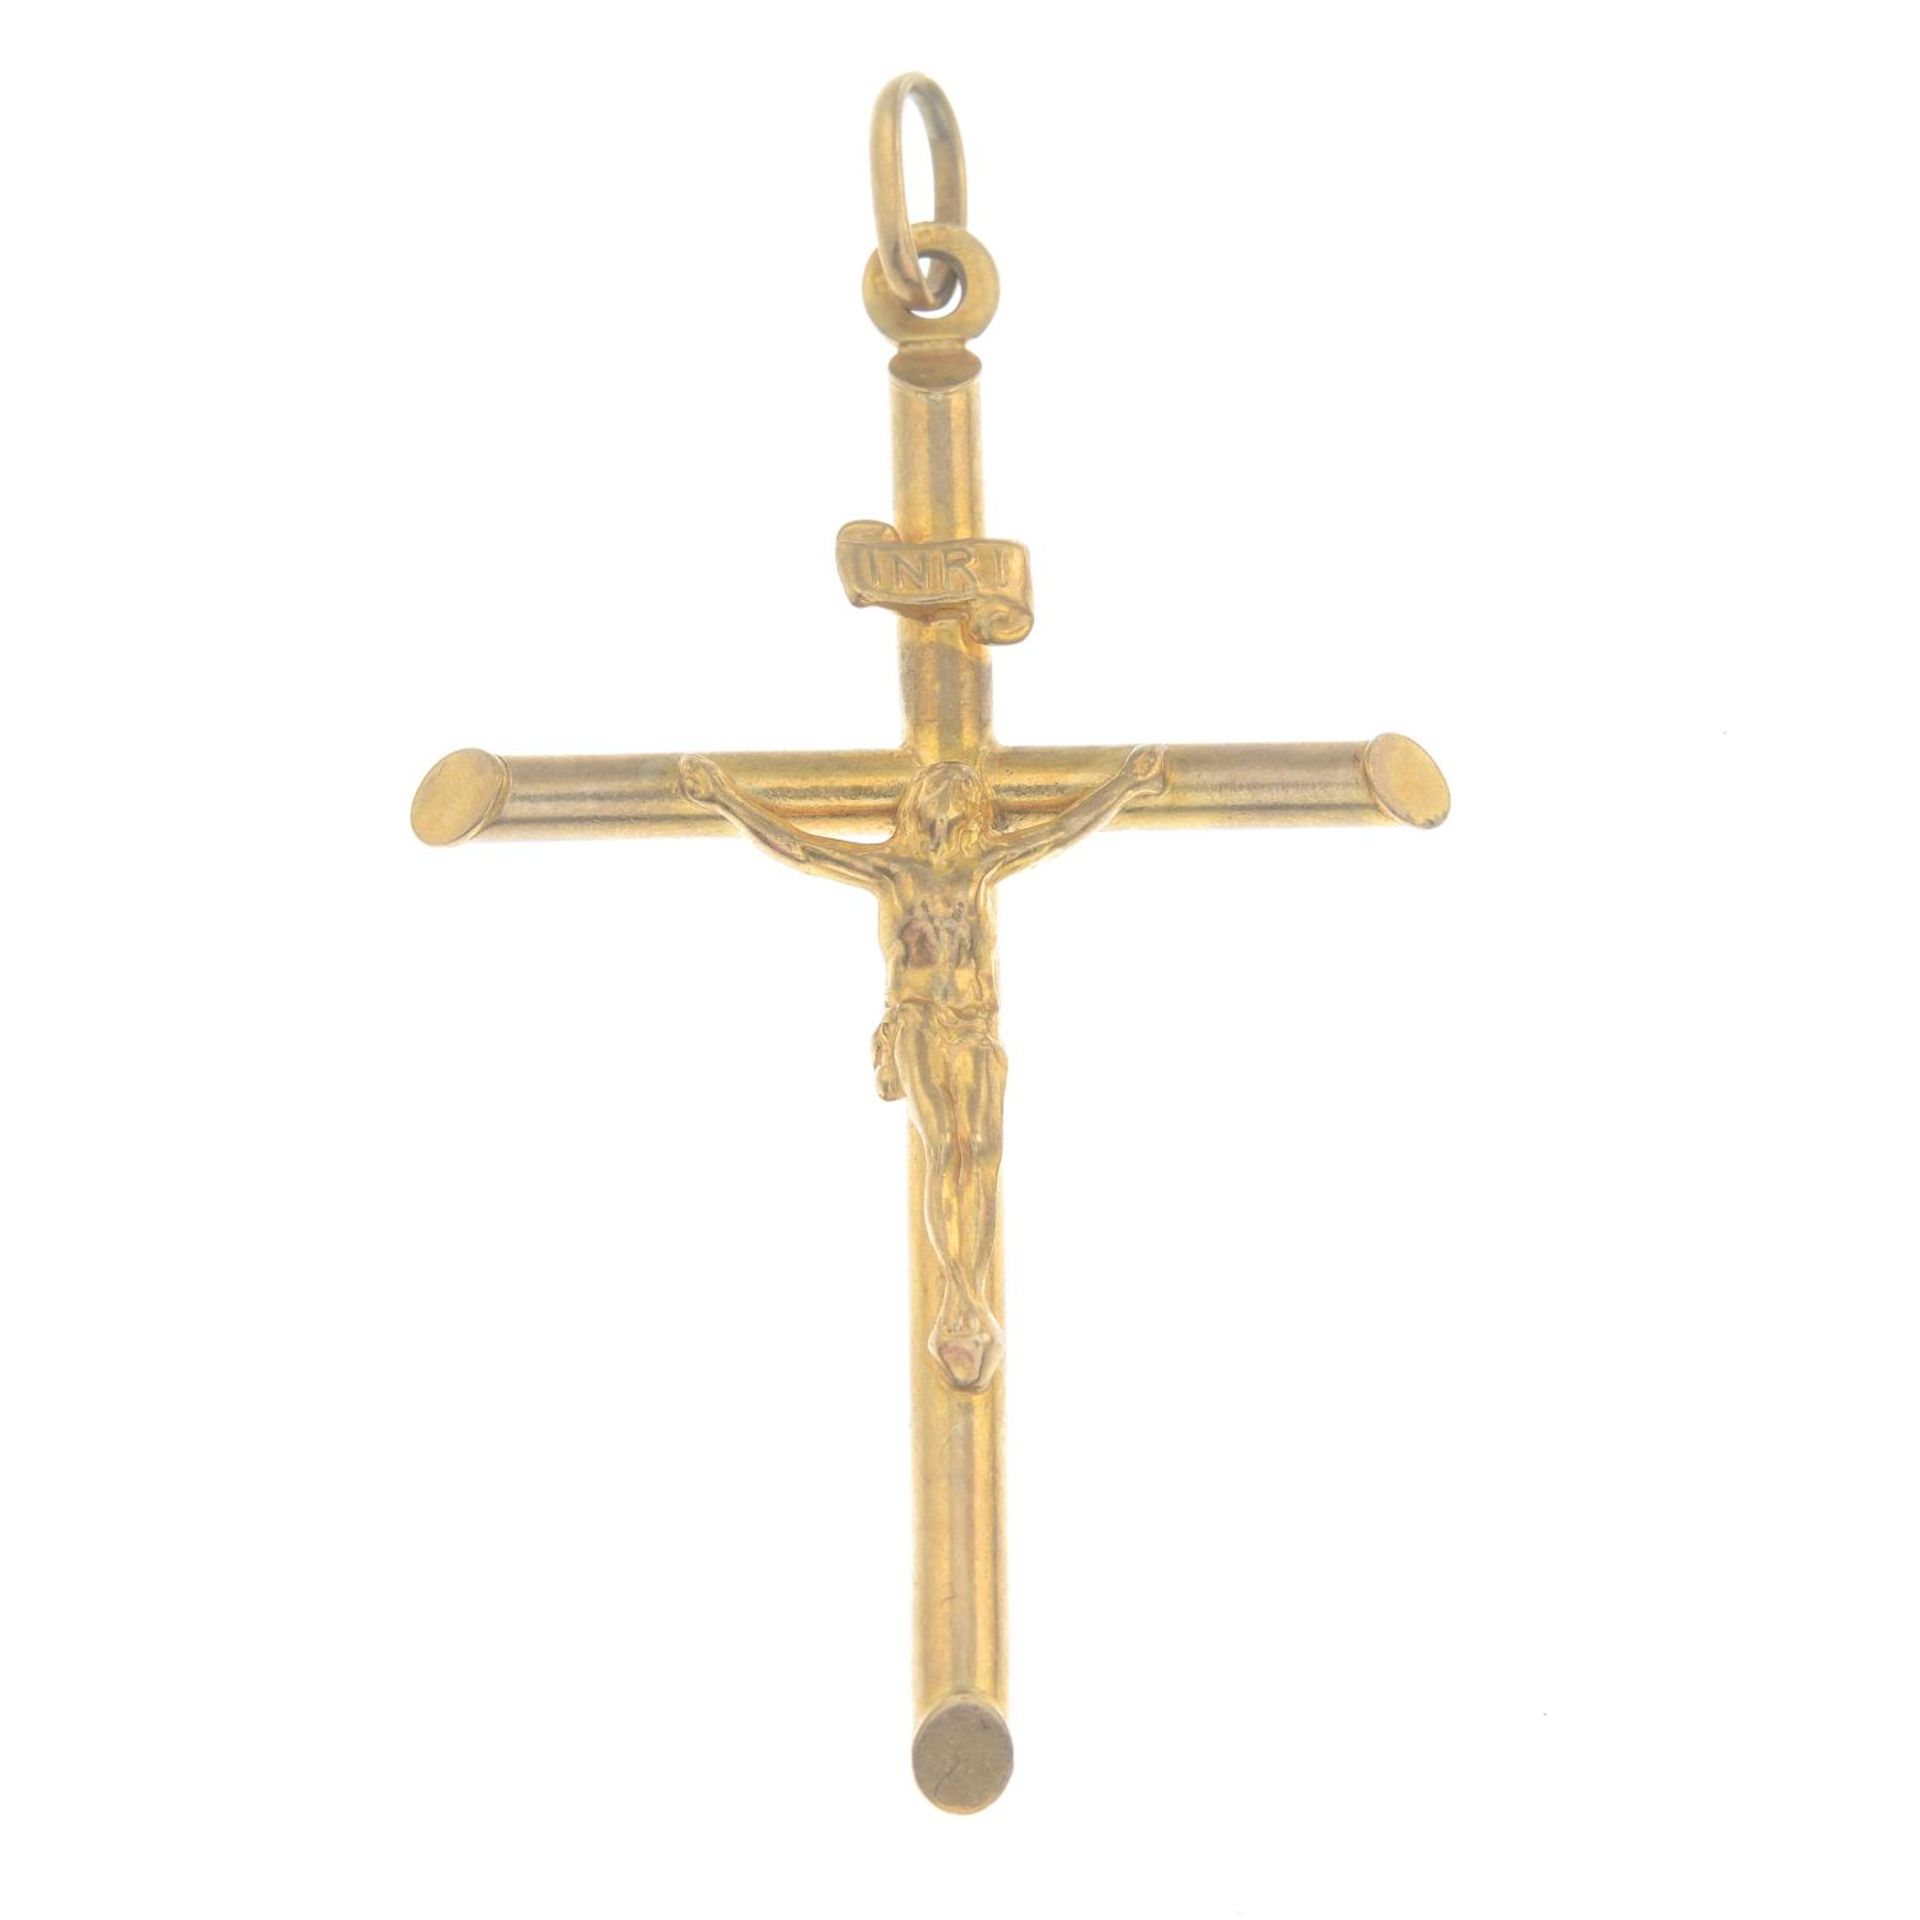 A 9ct gold crucifix cross pendant.Hallmarks for 9ct gold.